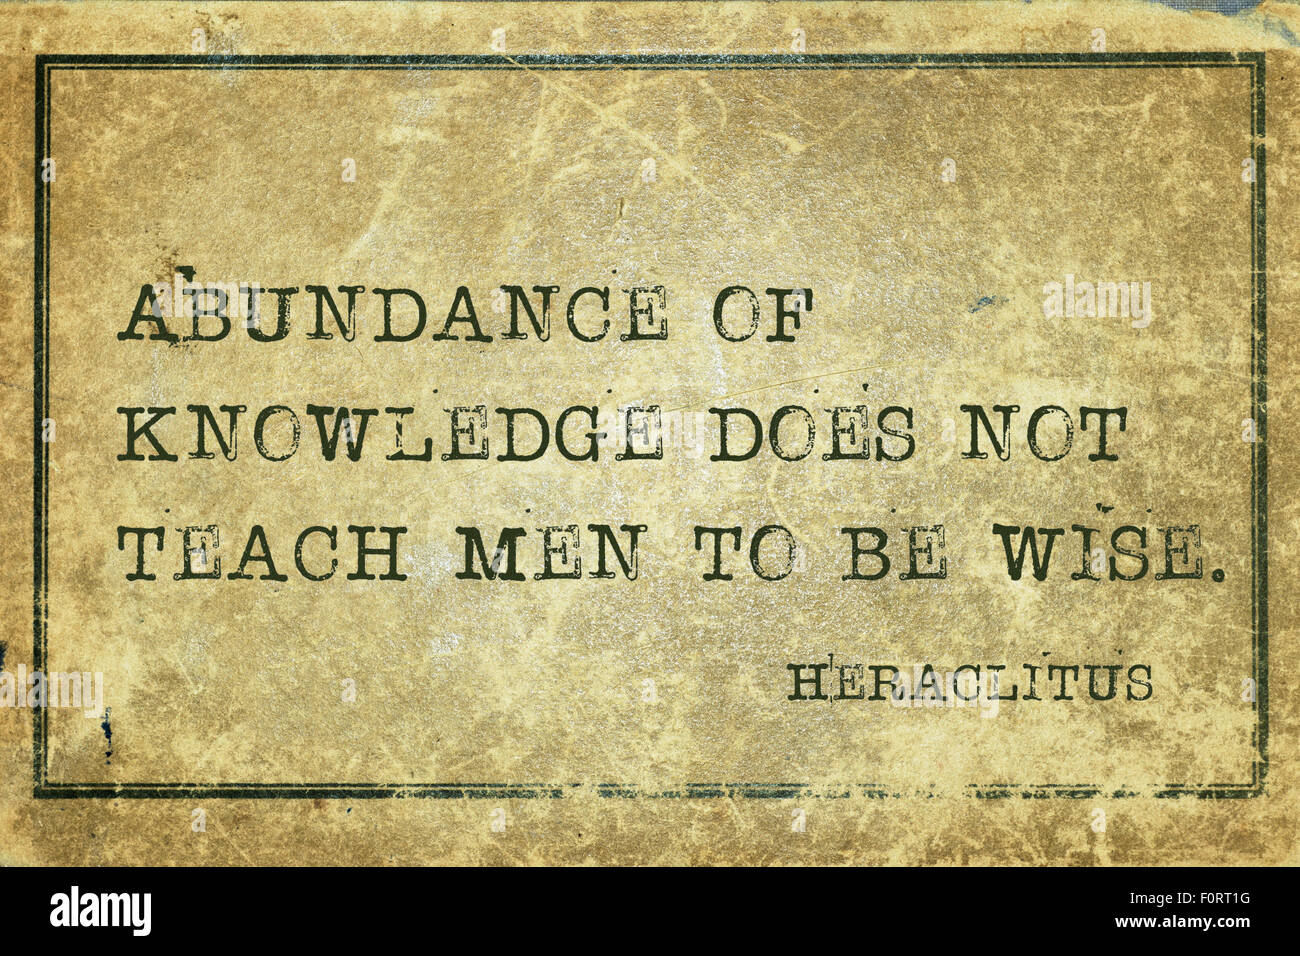 Abundance of knowledge does not teach men to be wise - ancient Greek philosopher Heraclitus quote printed on grunge vintage card Stock Photo